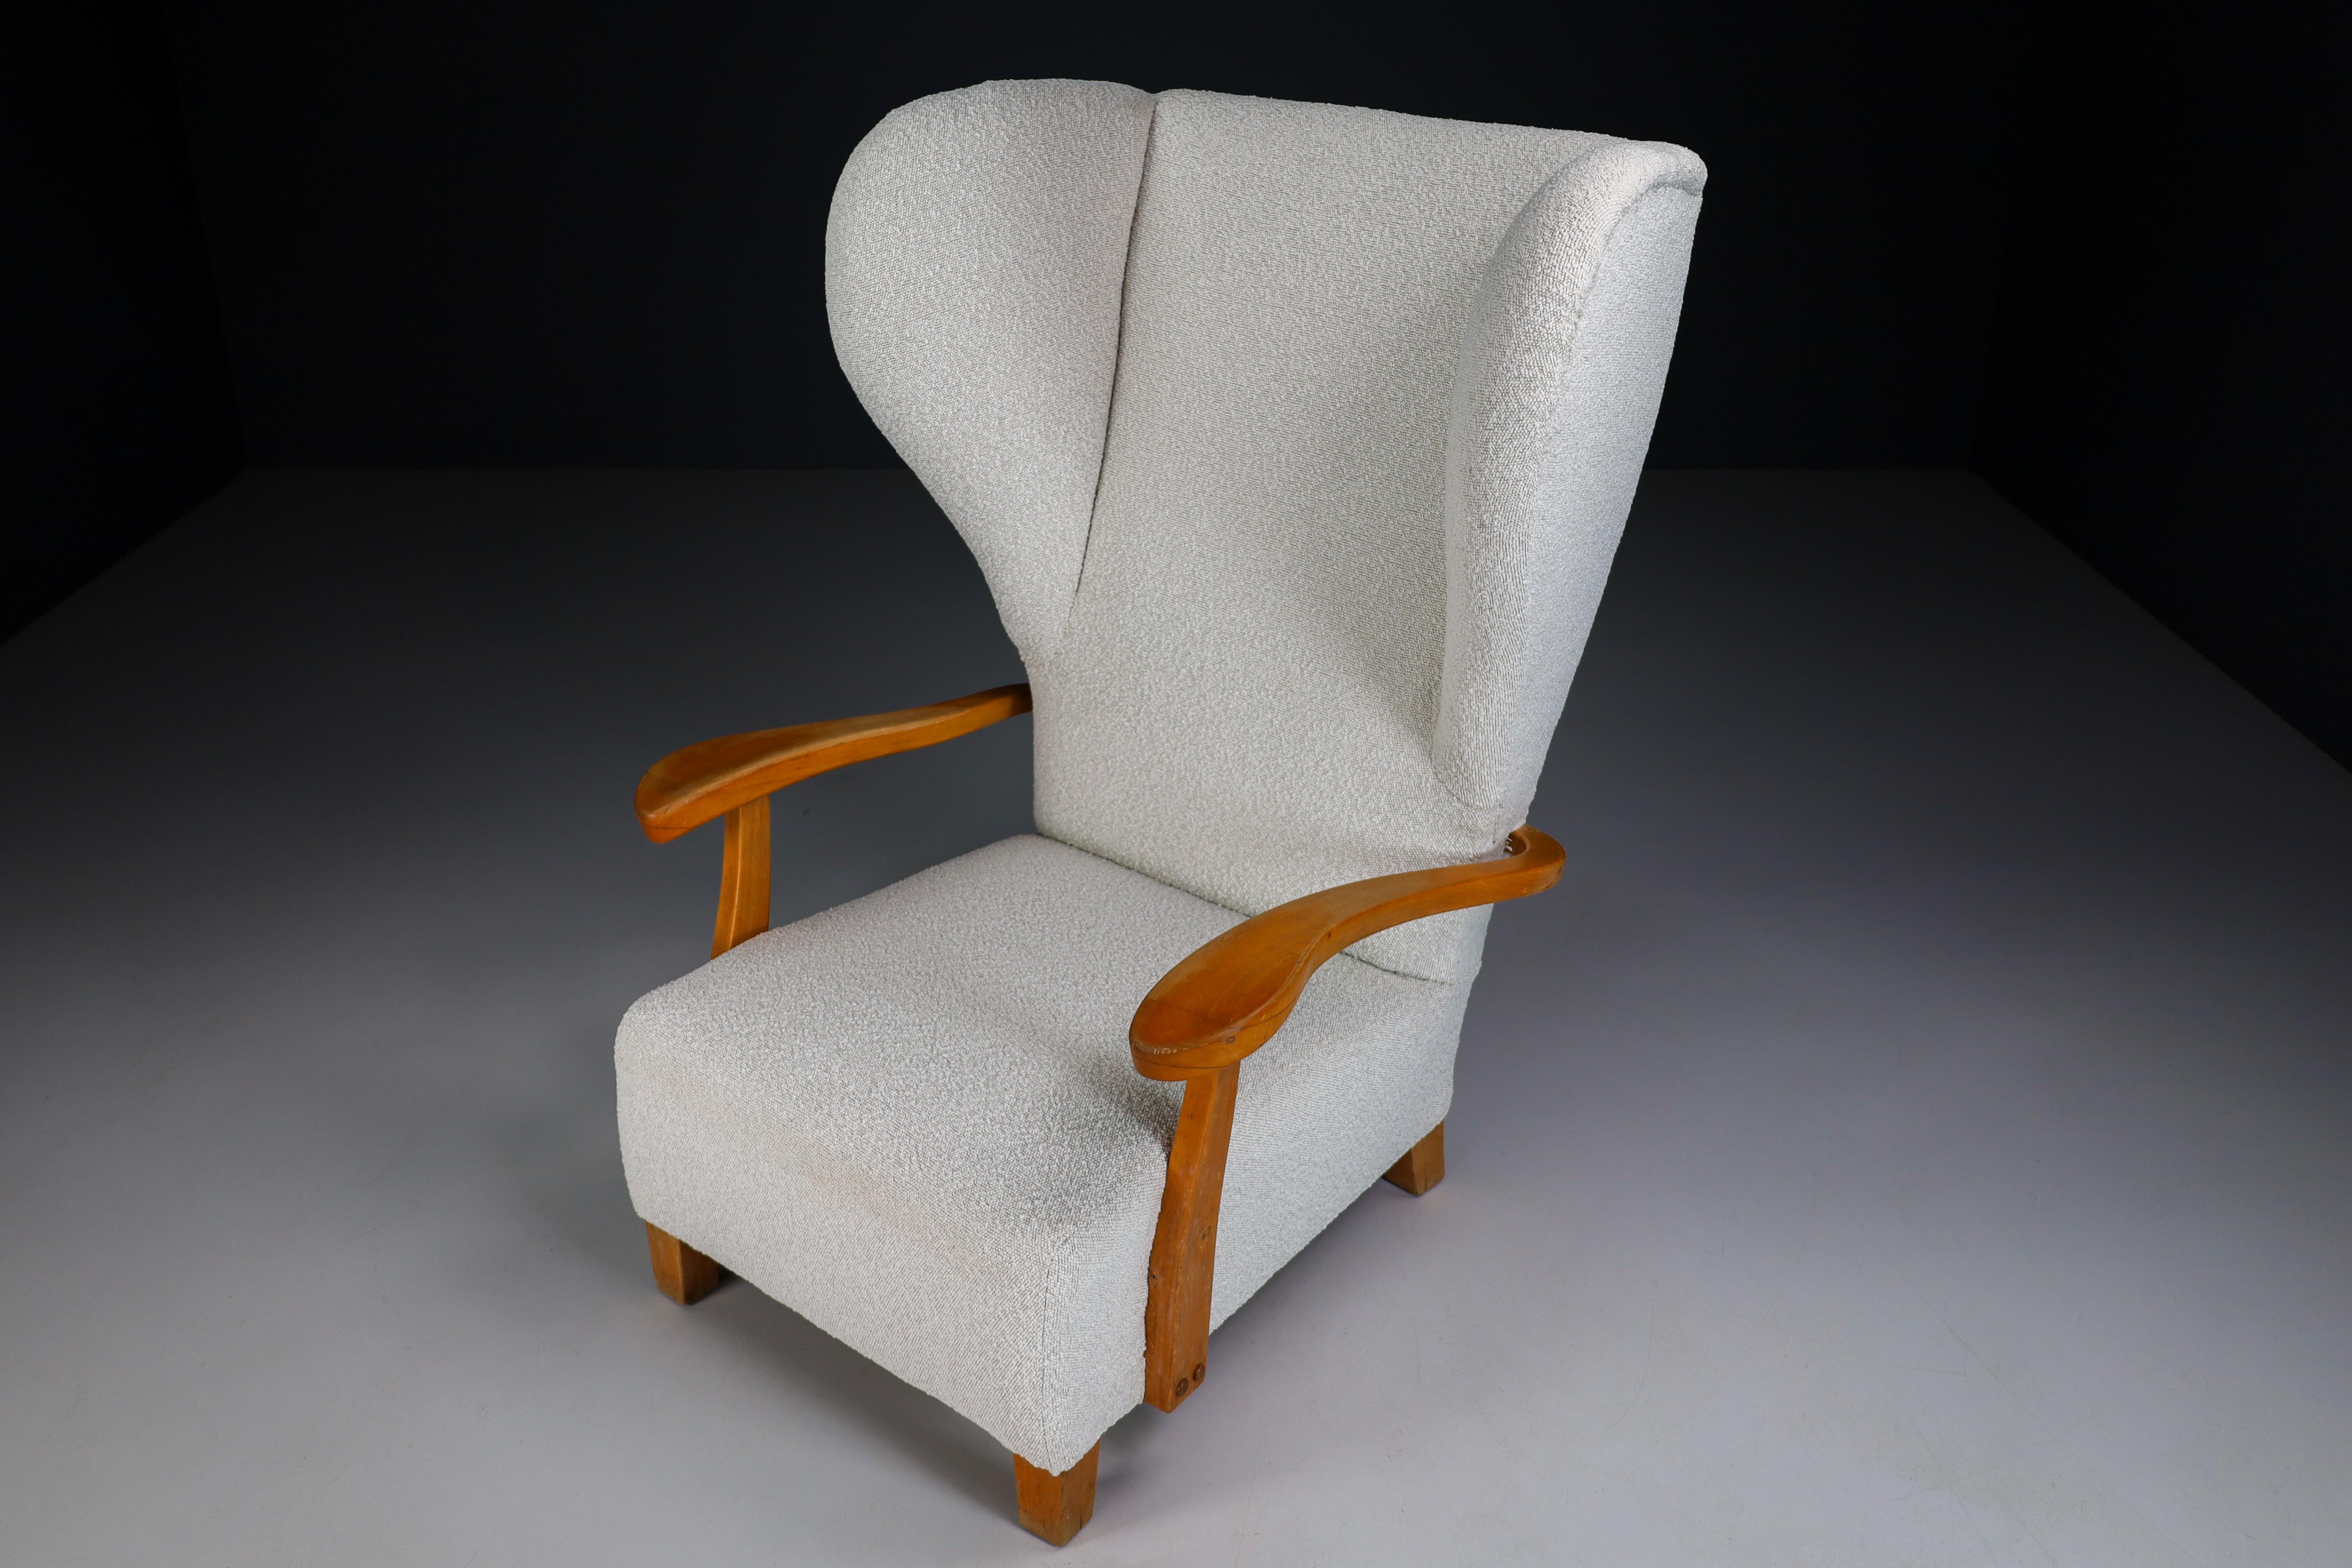 XXL Monumental Wingback Armchair in Walnut and Bouclé Fabric, France 1930s For Sale 4